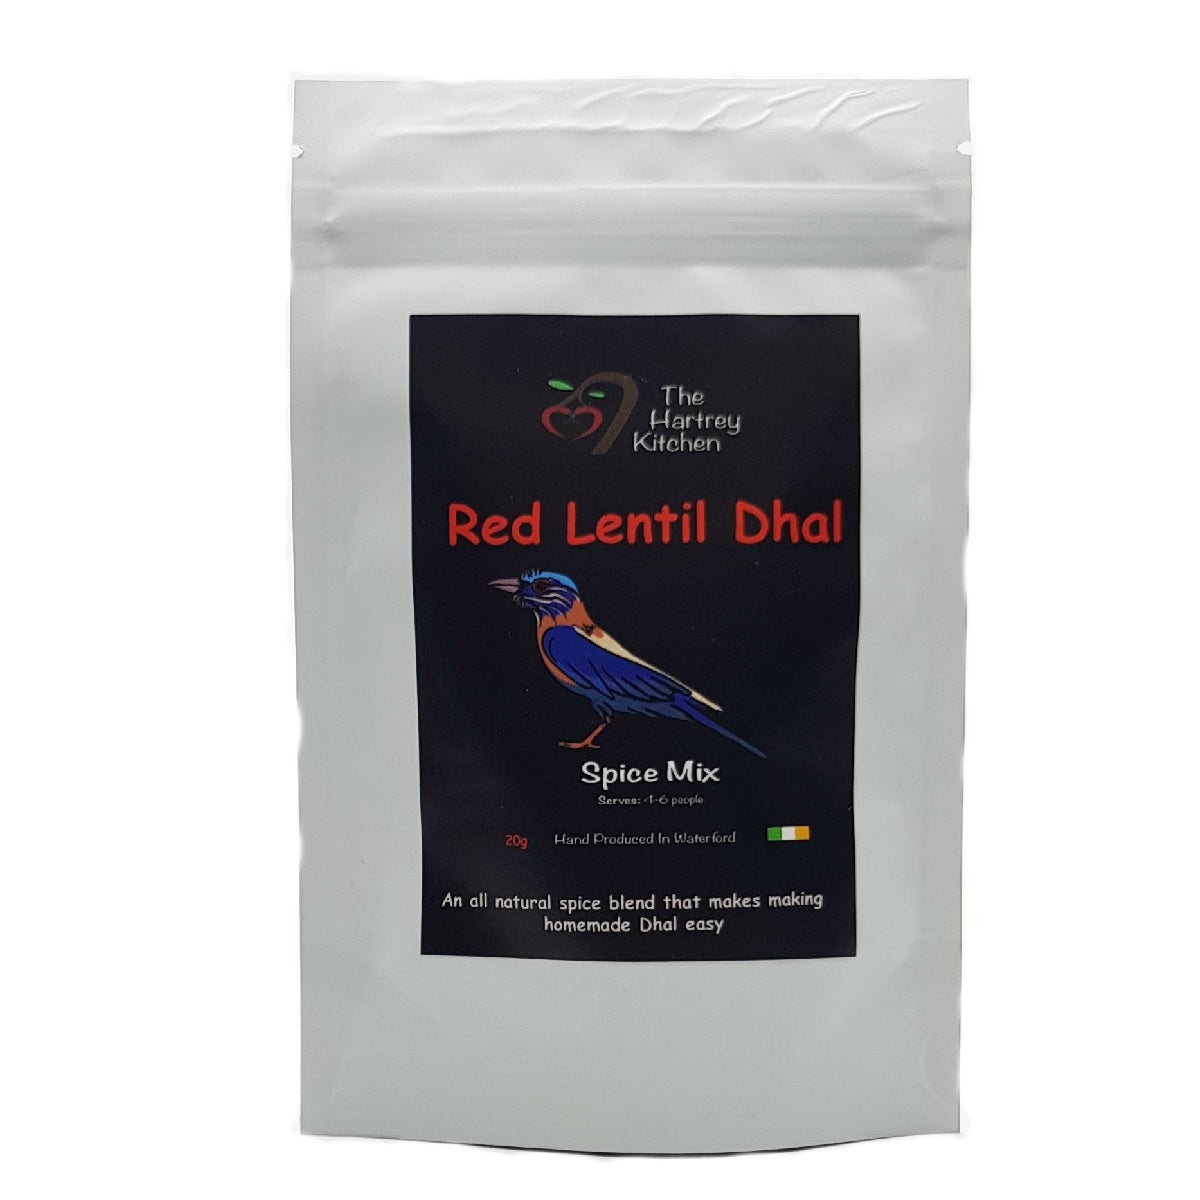 The Hartrey Kitchen Red Lentil Dhal 20g